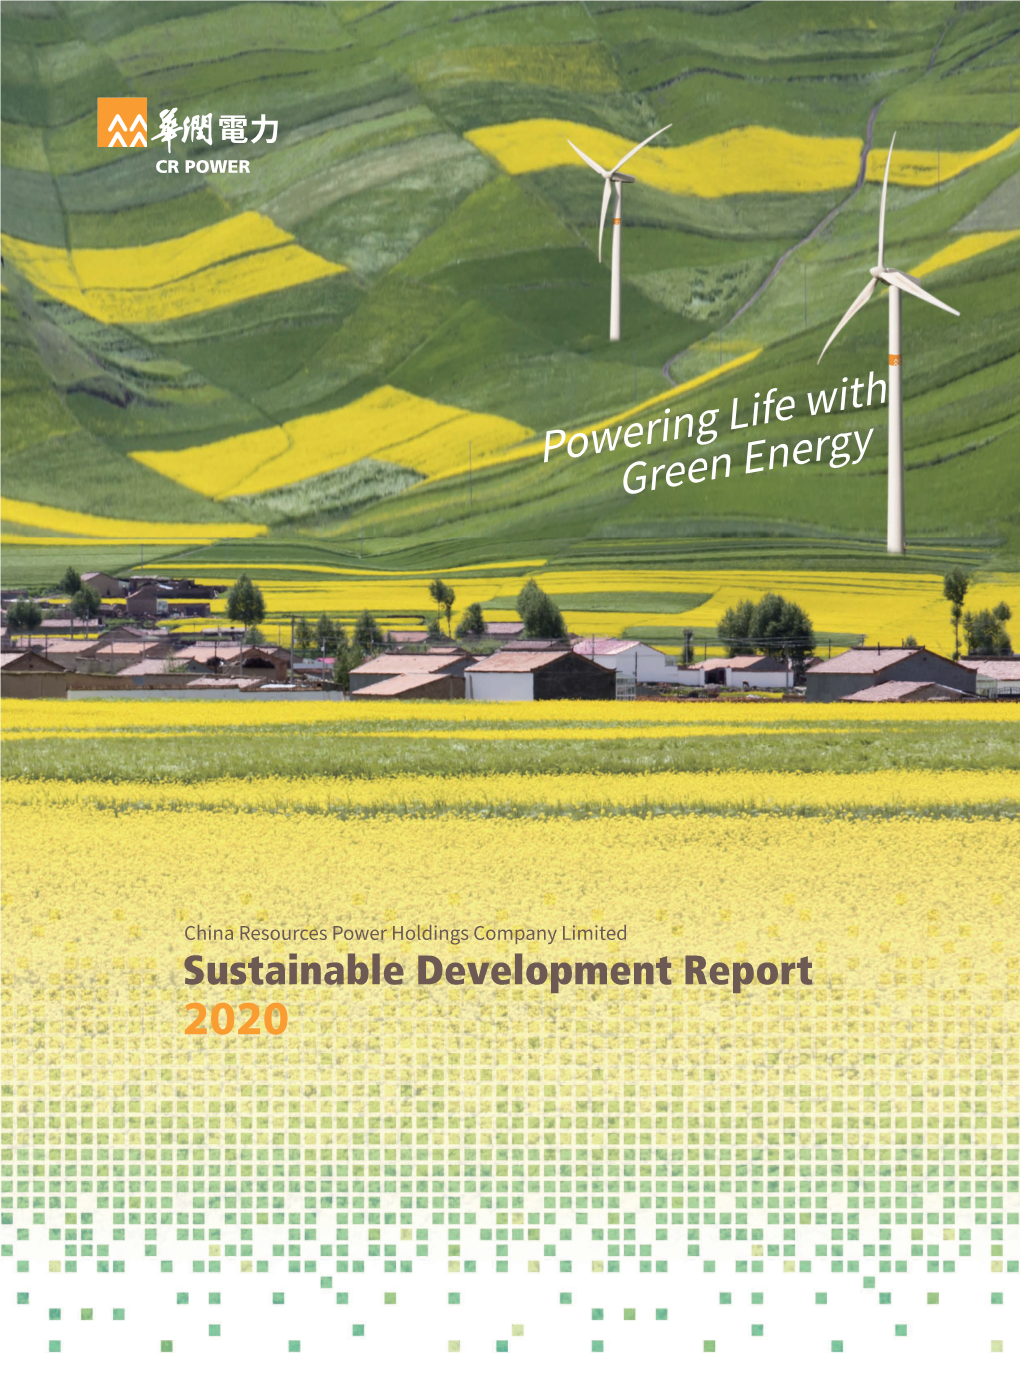 Green Energy Powering Life with China Resources Power Holdings Company Limited Holdings Company Power China Resources Sustainable Development Report 2020